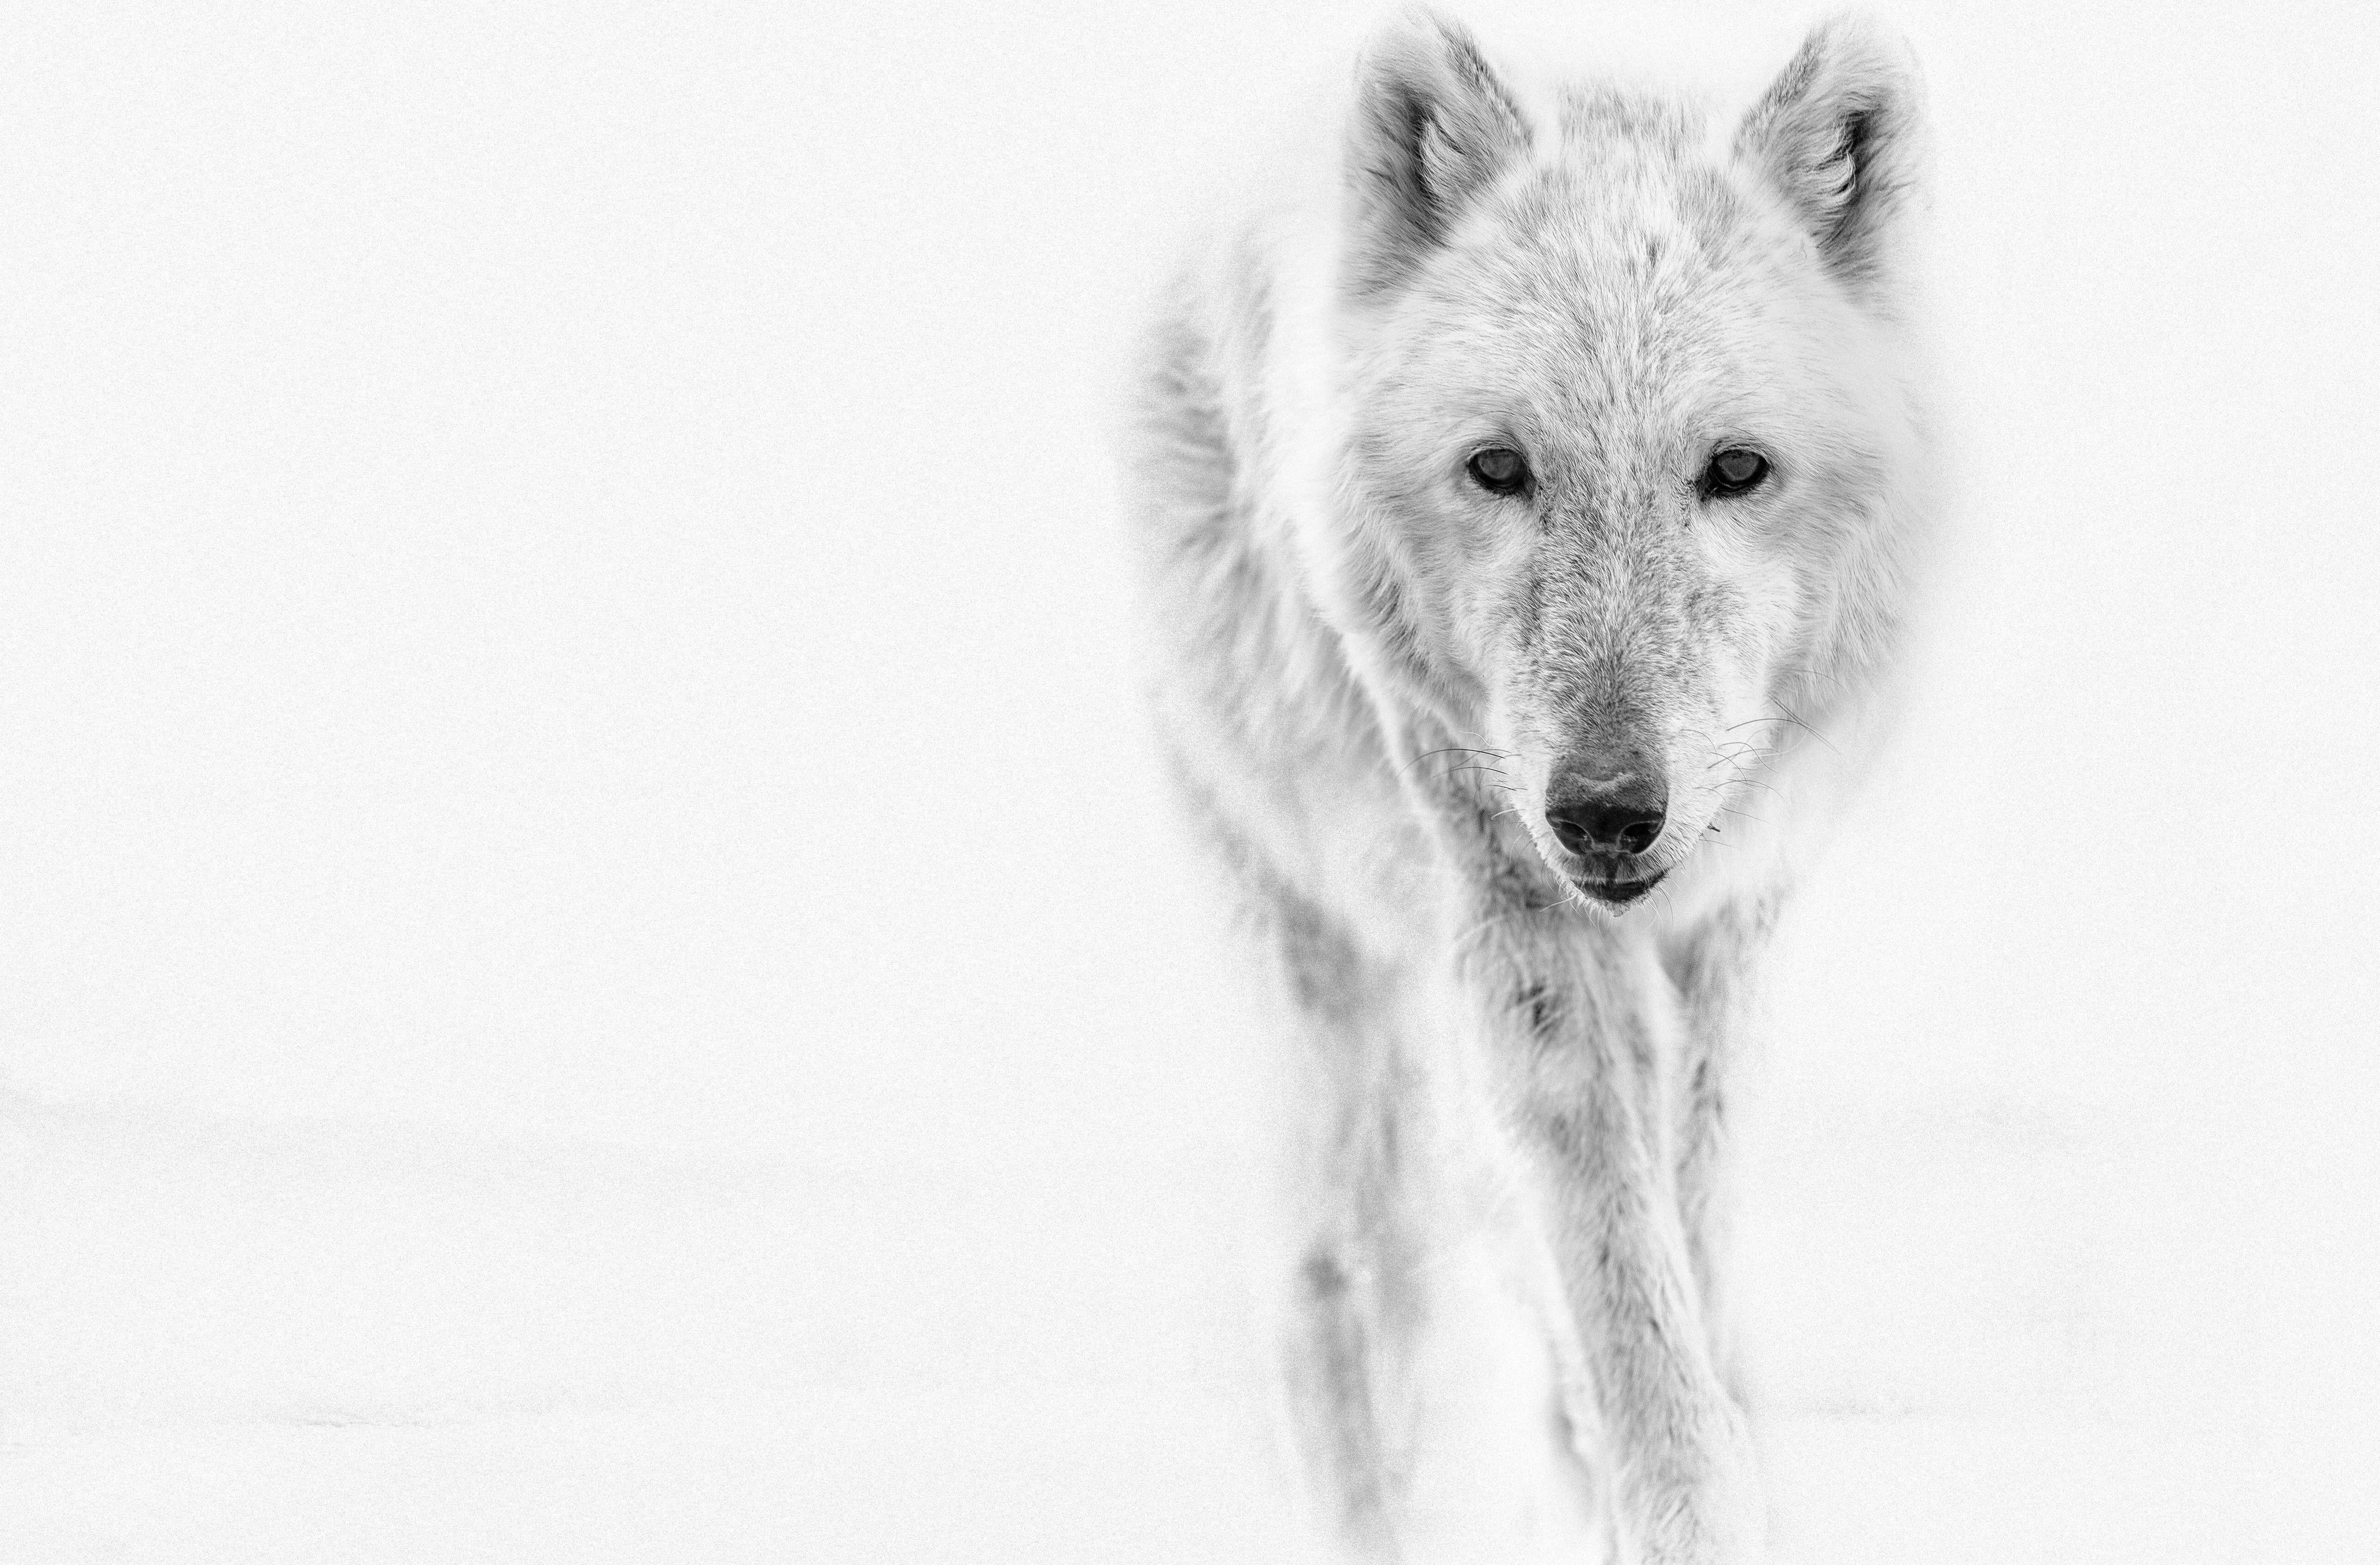 Shane Russeck Animal Print - "Arctic Wolf" 28 x 40  Black and White Photography, Photograph Fine Art Wolves